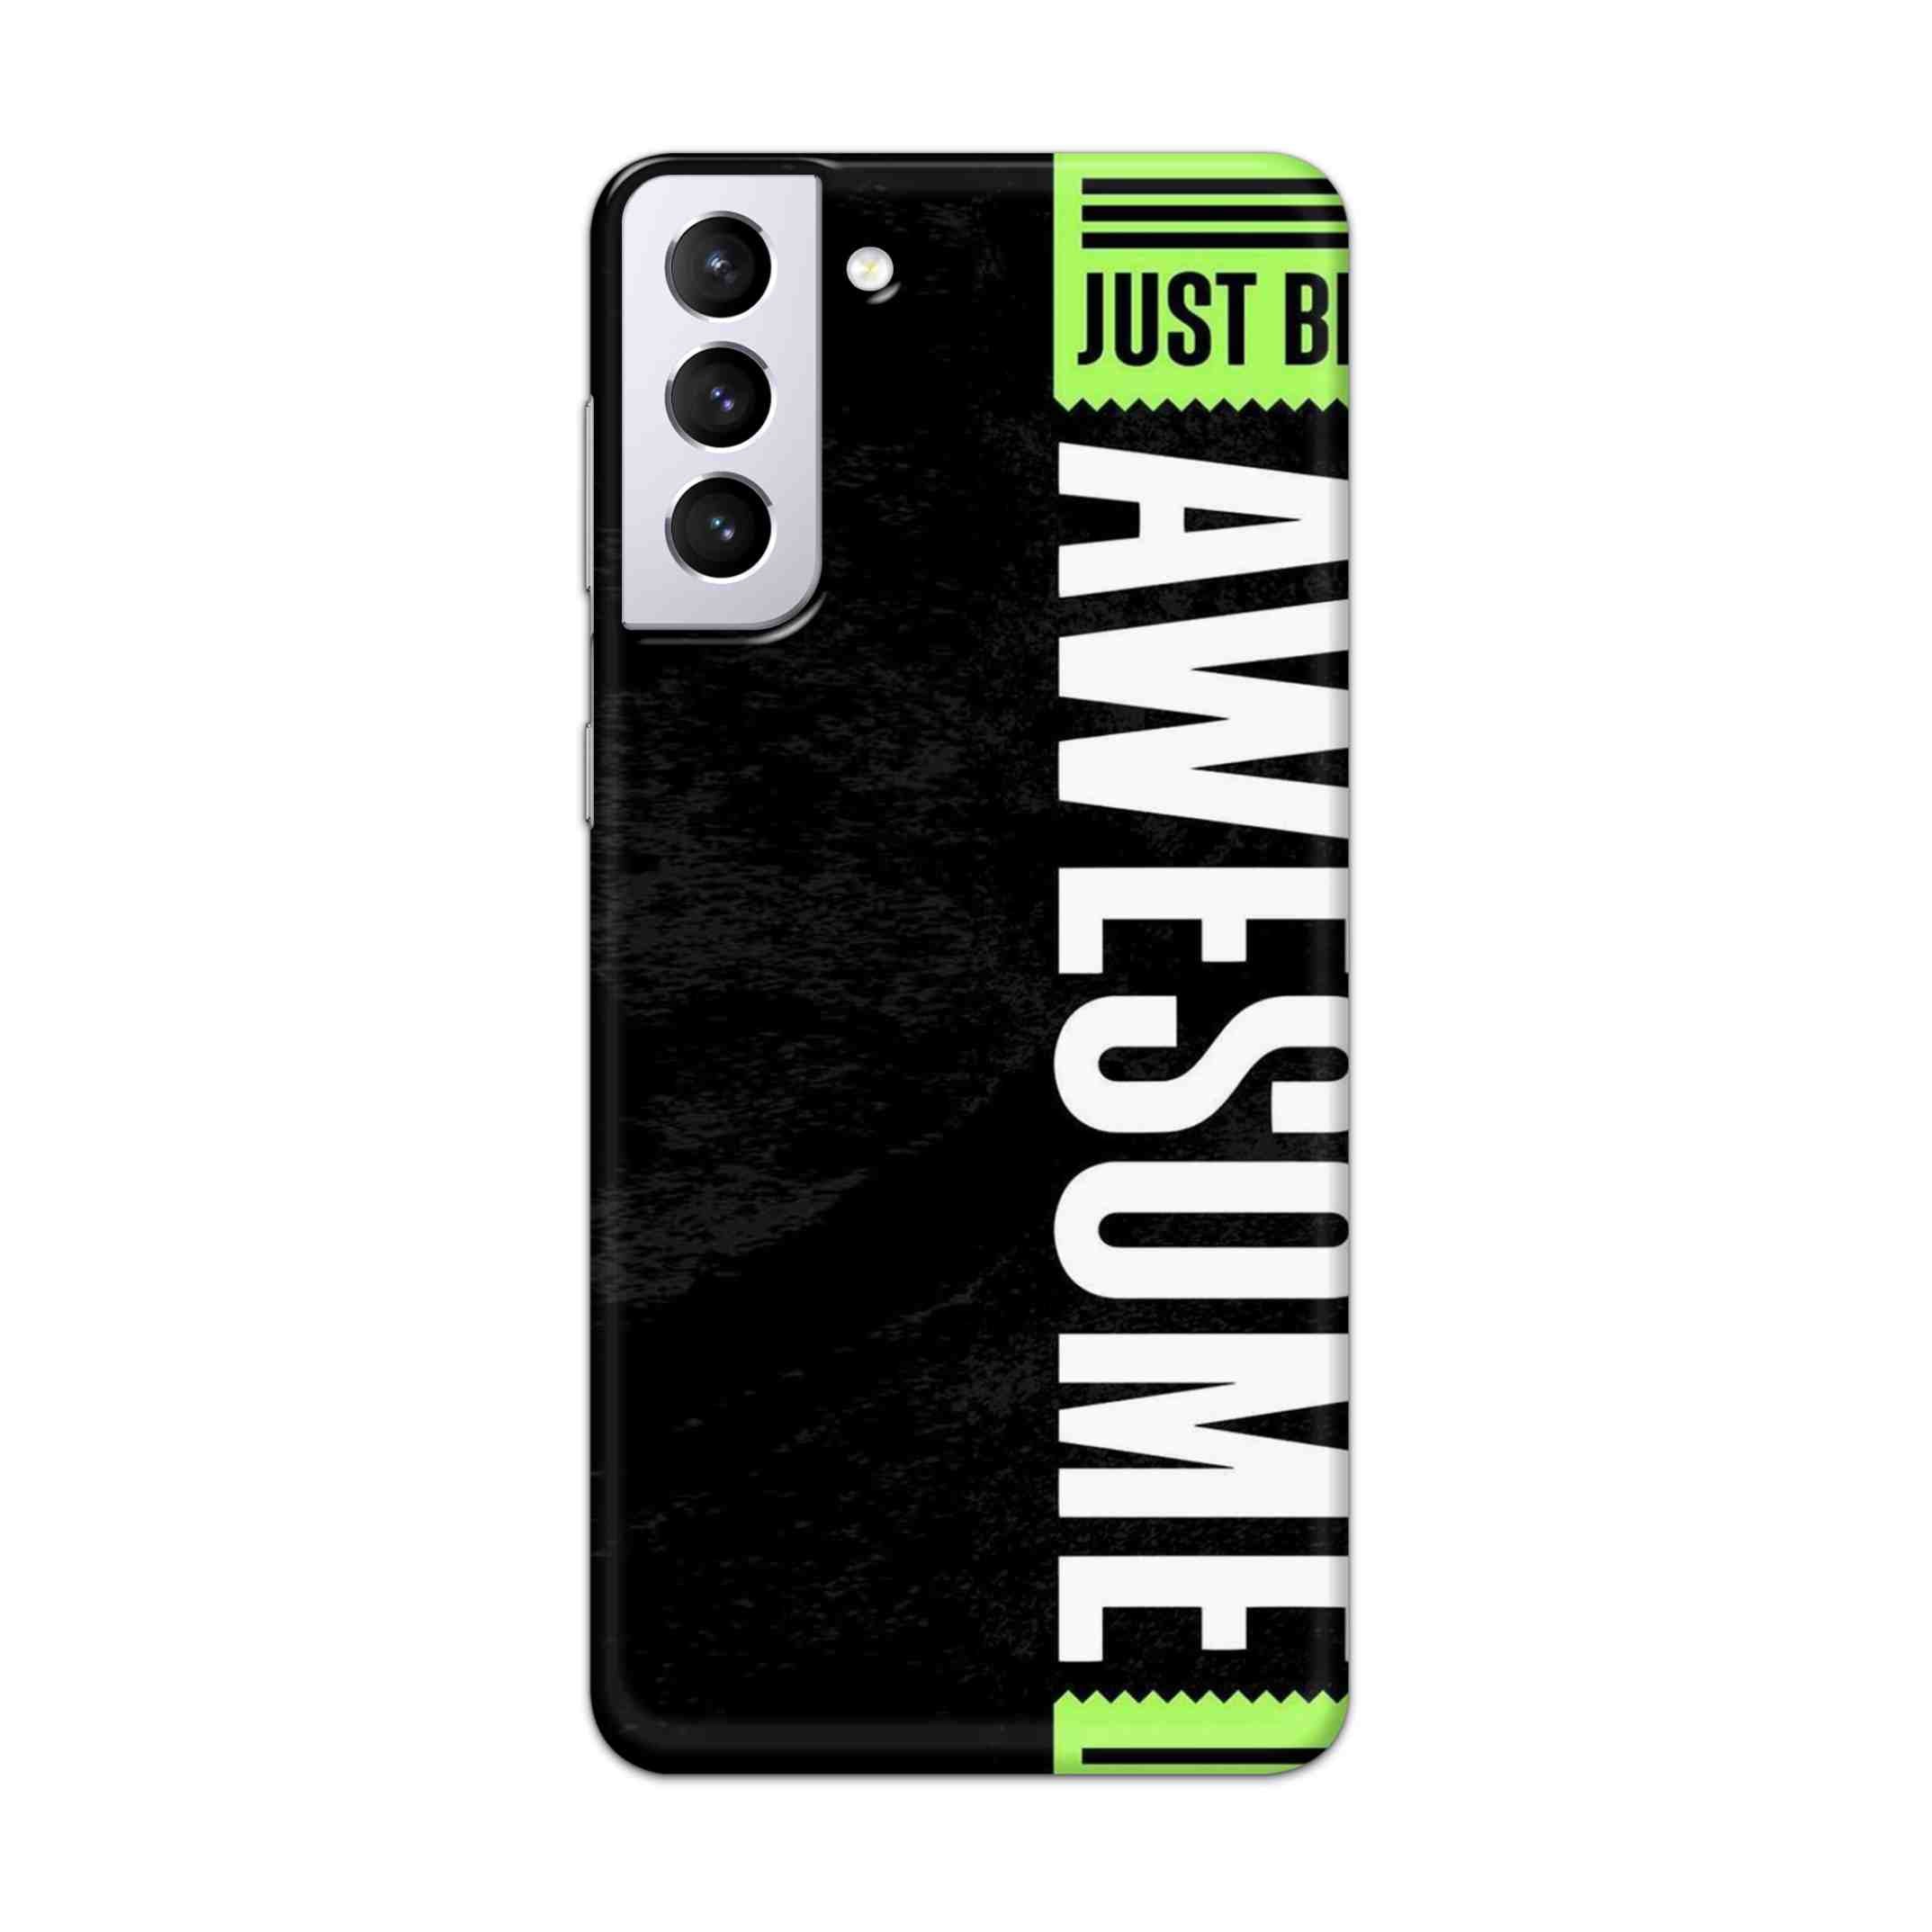 Buy Awesome Street Hard Back Mobile Phone Case Cover For Samsung Galaxy S21 Plus Online